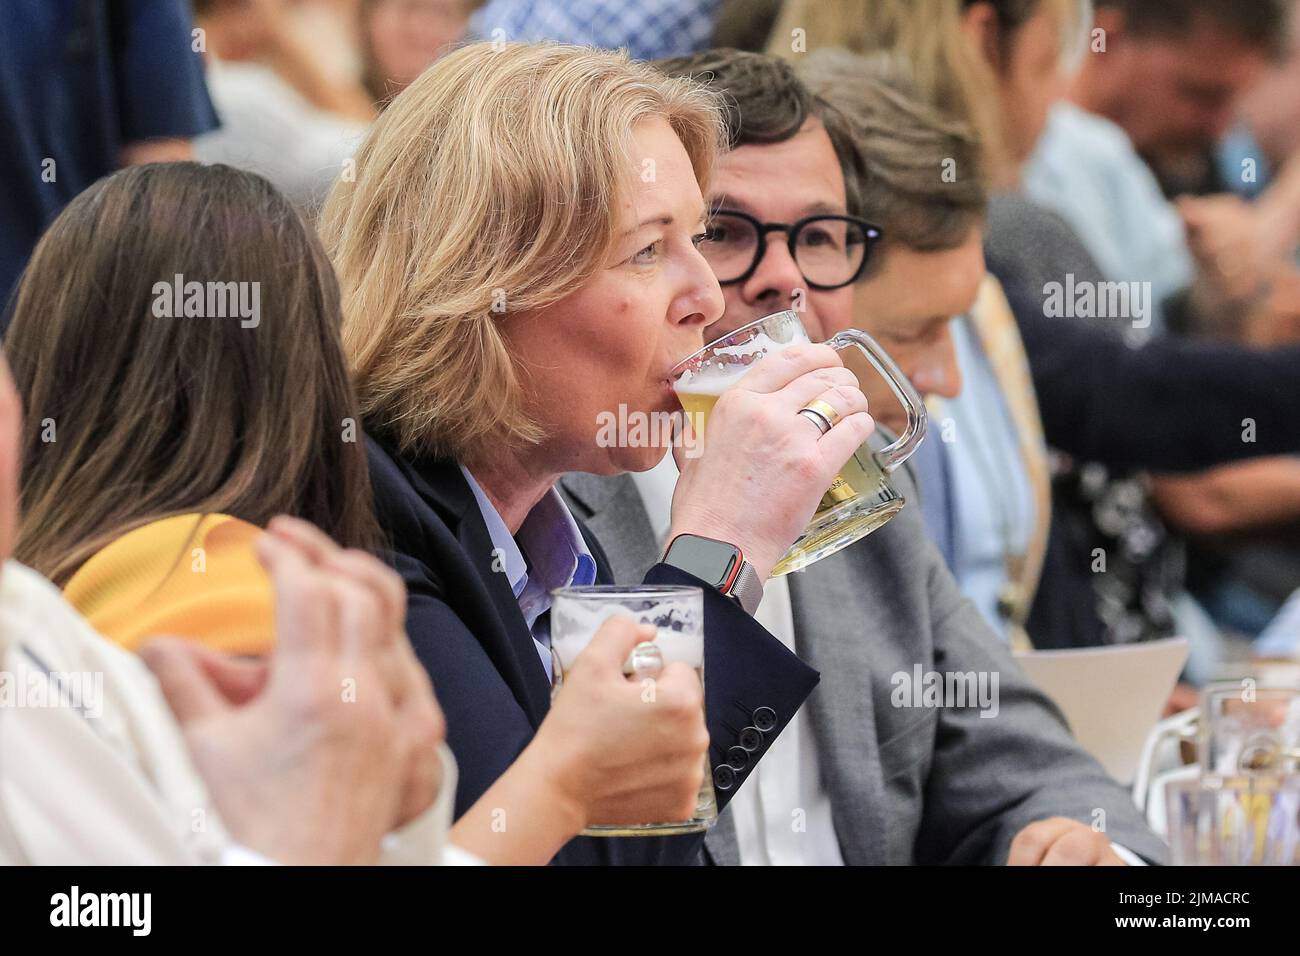 Crange, Herne, NRW, 05th Aug July, 2022. President of the German Parliament (Bundestagspräsidentin), Bärbel Bas (SPD), has fun in the tent and enjoys a beer at the opening ceremony. The official opening ceremony of the 2022 Cranger Kirmes, Germany's 3rd largest funfair and the largest of its kind in NRW, is attended by invited guests in the festival tent and beer hall. The popular fair, which was paused during the pandemic, regularly attracts more than 4m visitors during its 10 day run and has been established for decades. Credit: Imageplotter/Alamy Live News Stock Photo